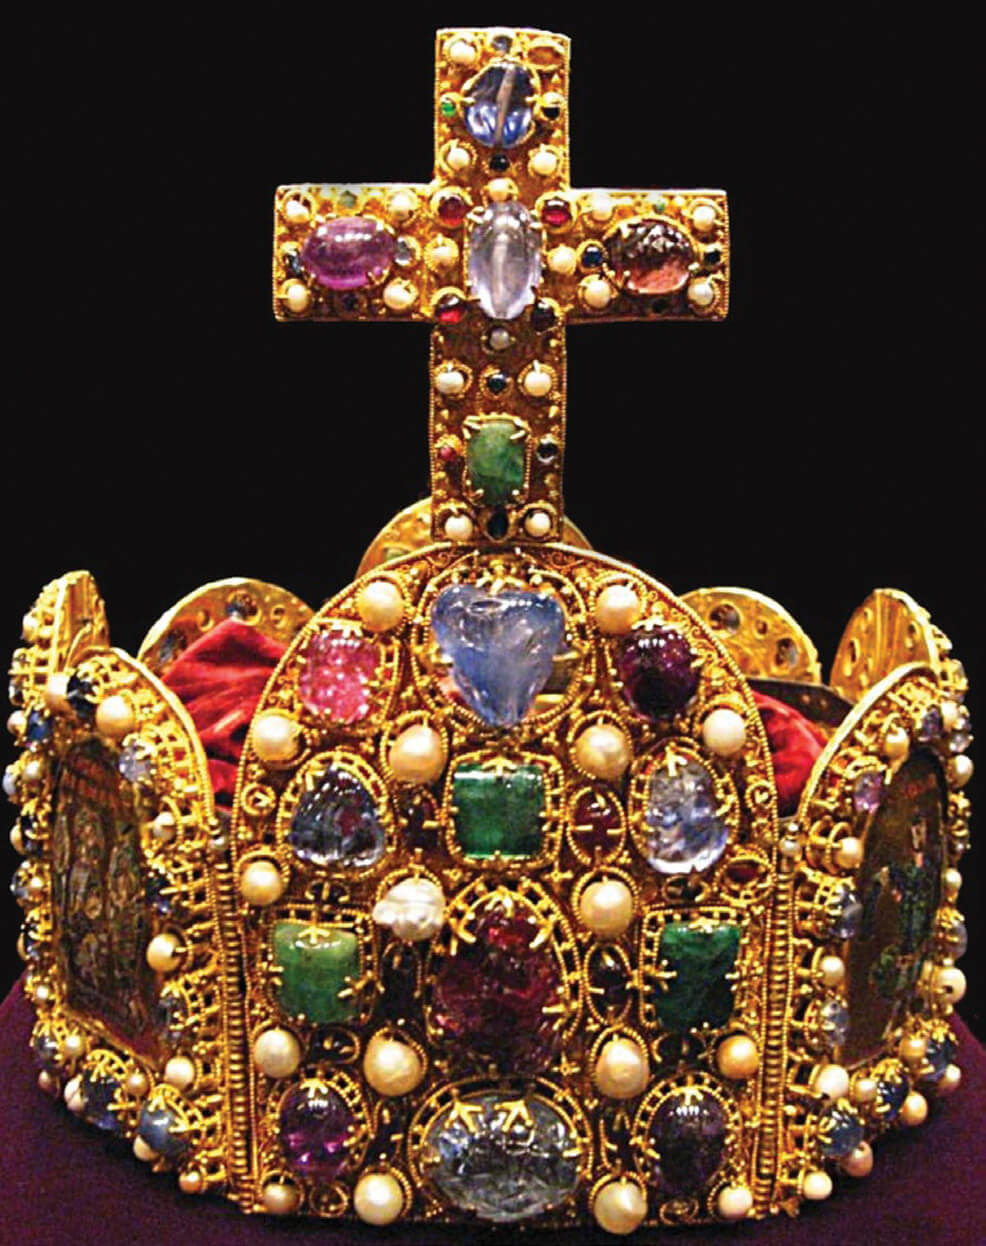 Imperial Crown of the Holy Roman Empire, 10th Century - Kunsthistorisches Museum, Vienna